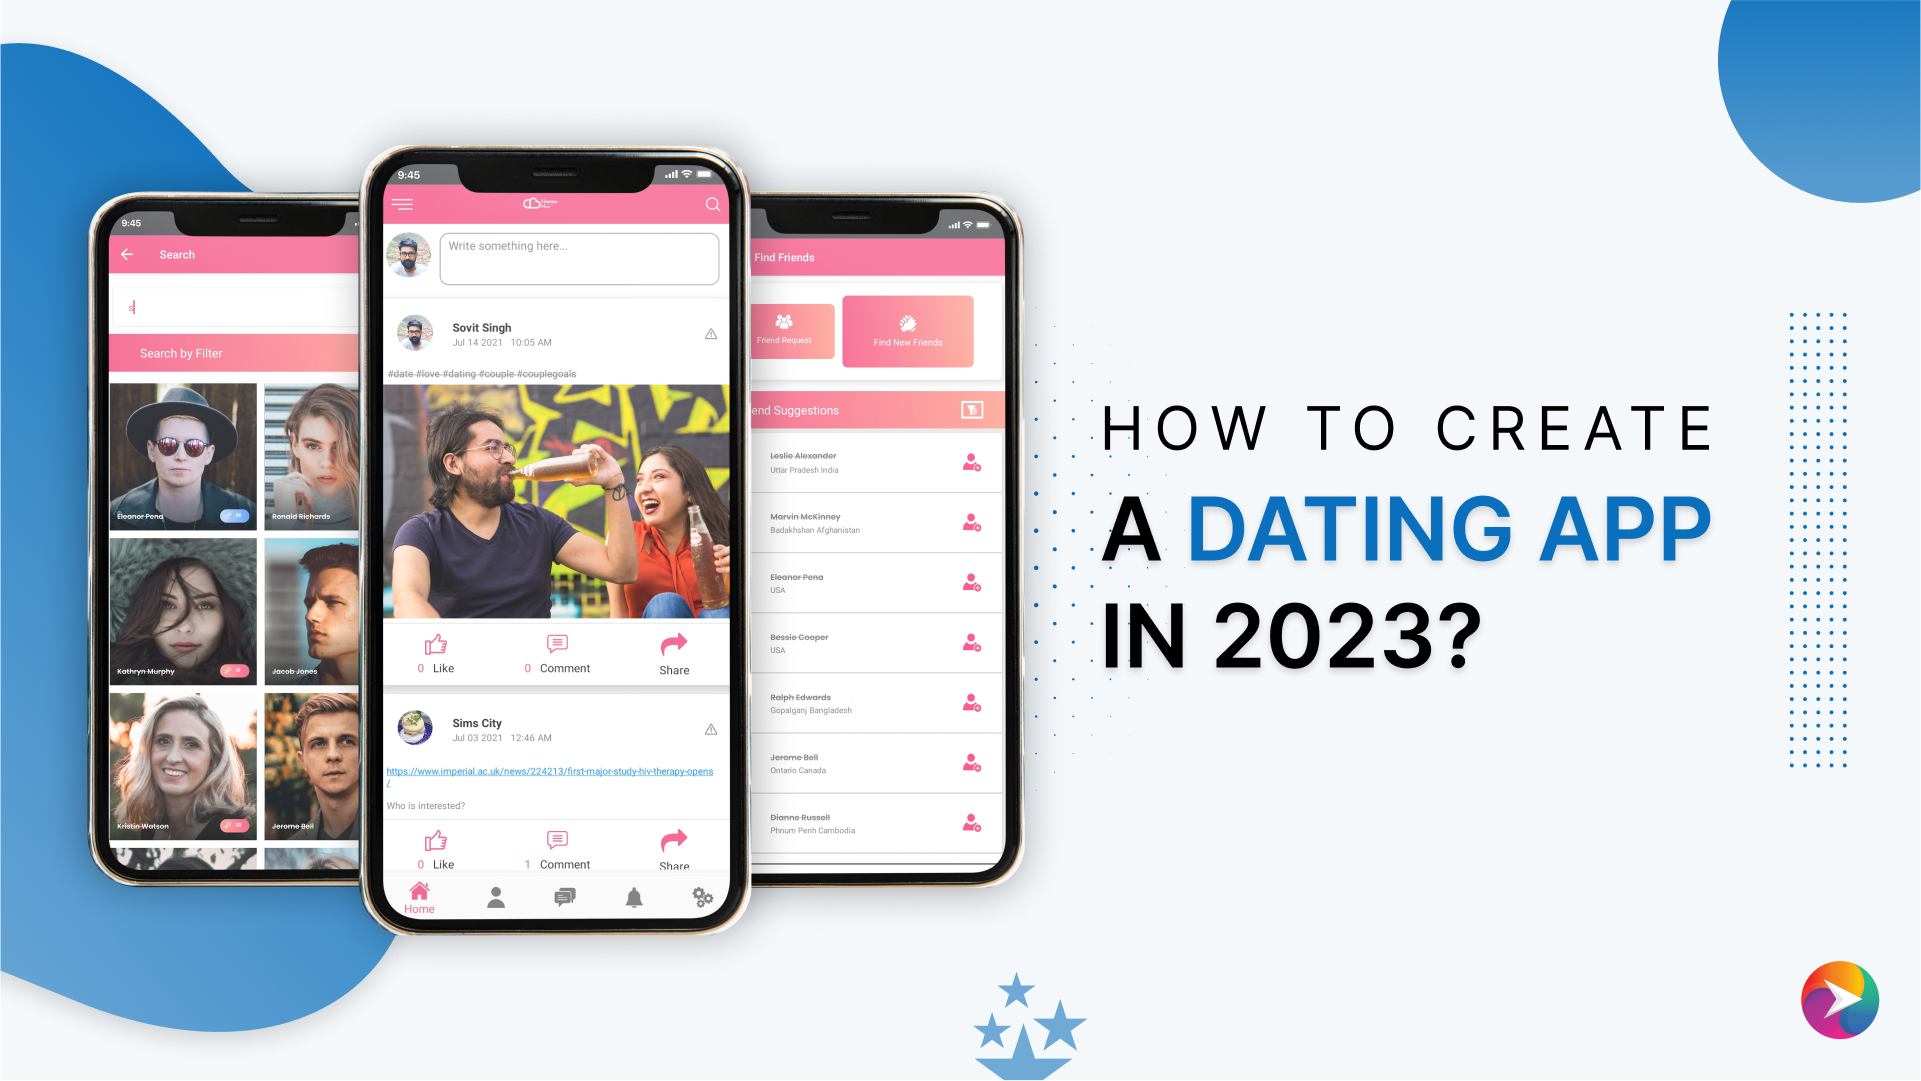 How to Create a Dating App in 2023?